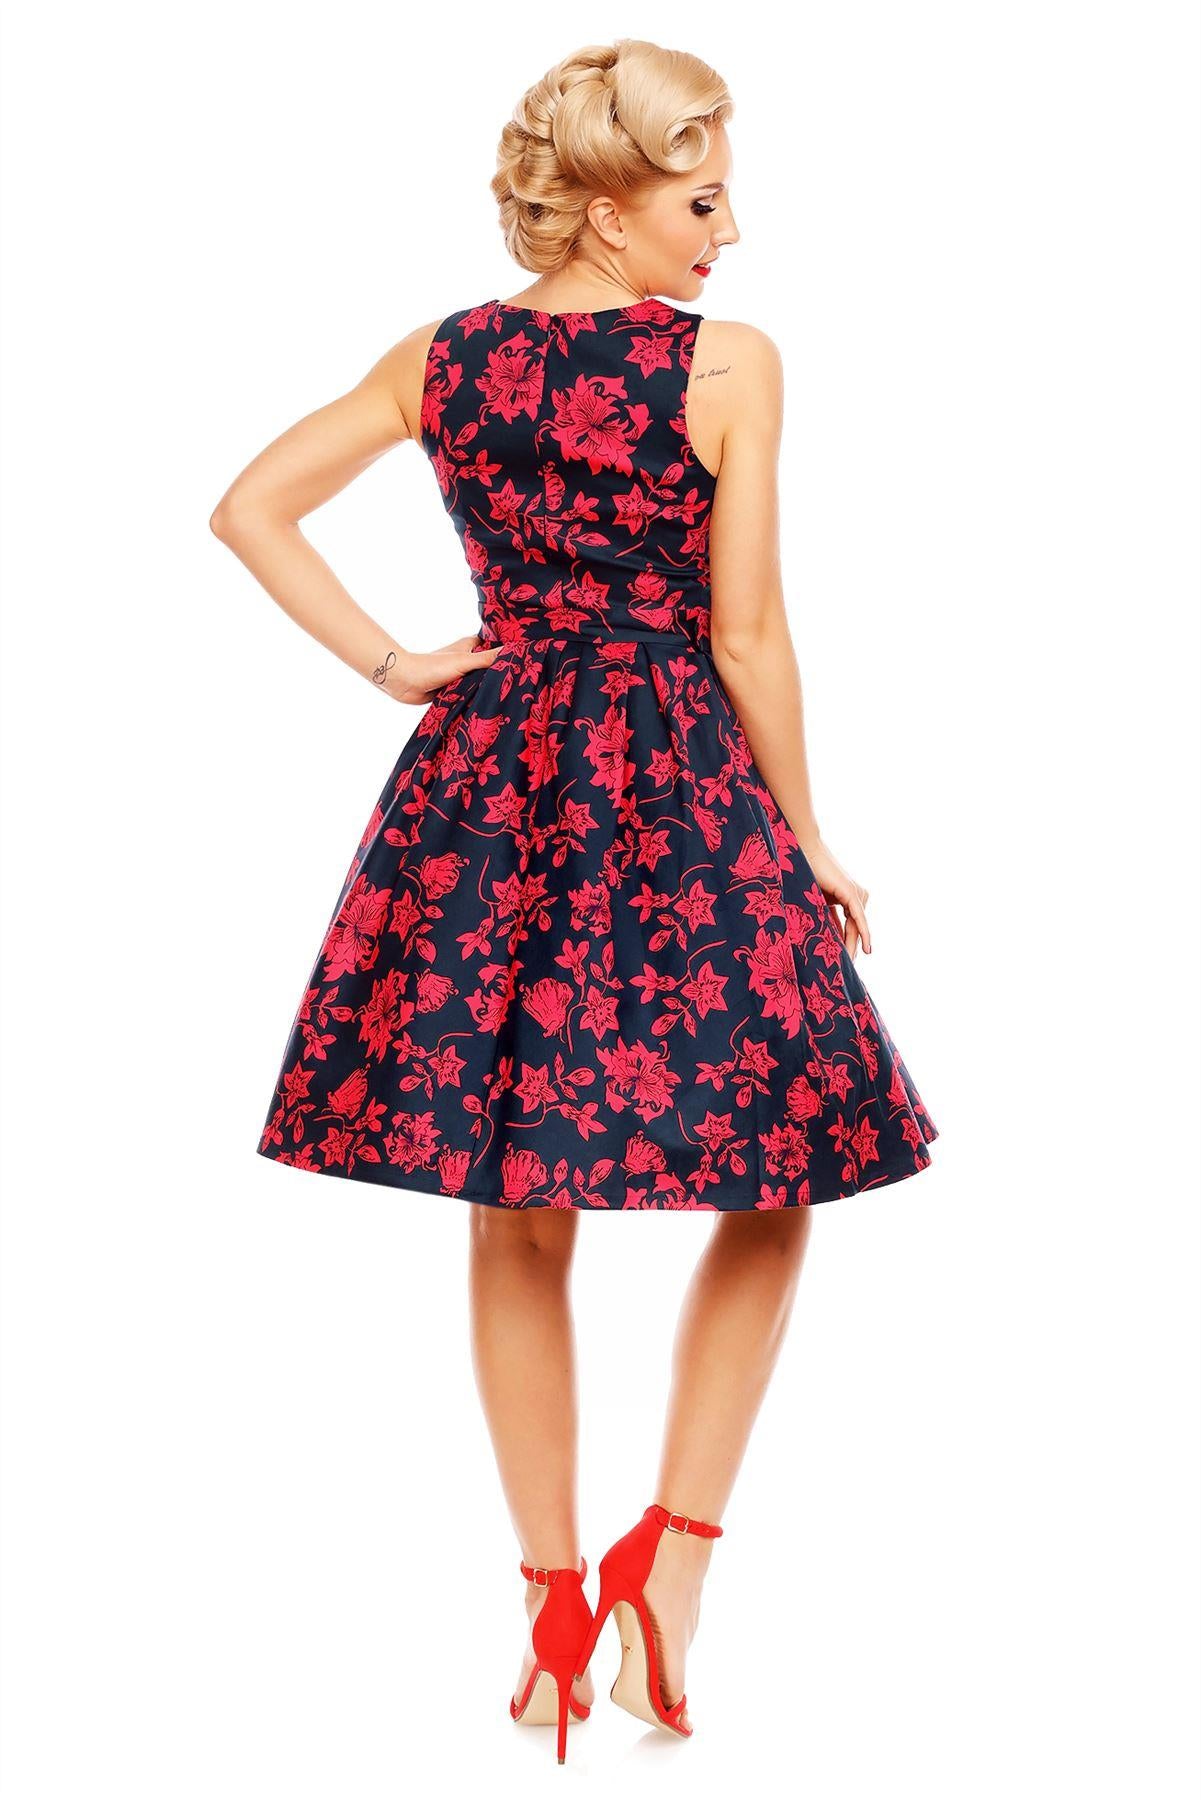 Model wearing Retro Swing Dress in Navy Blue/Red floral print, back view